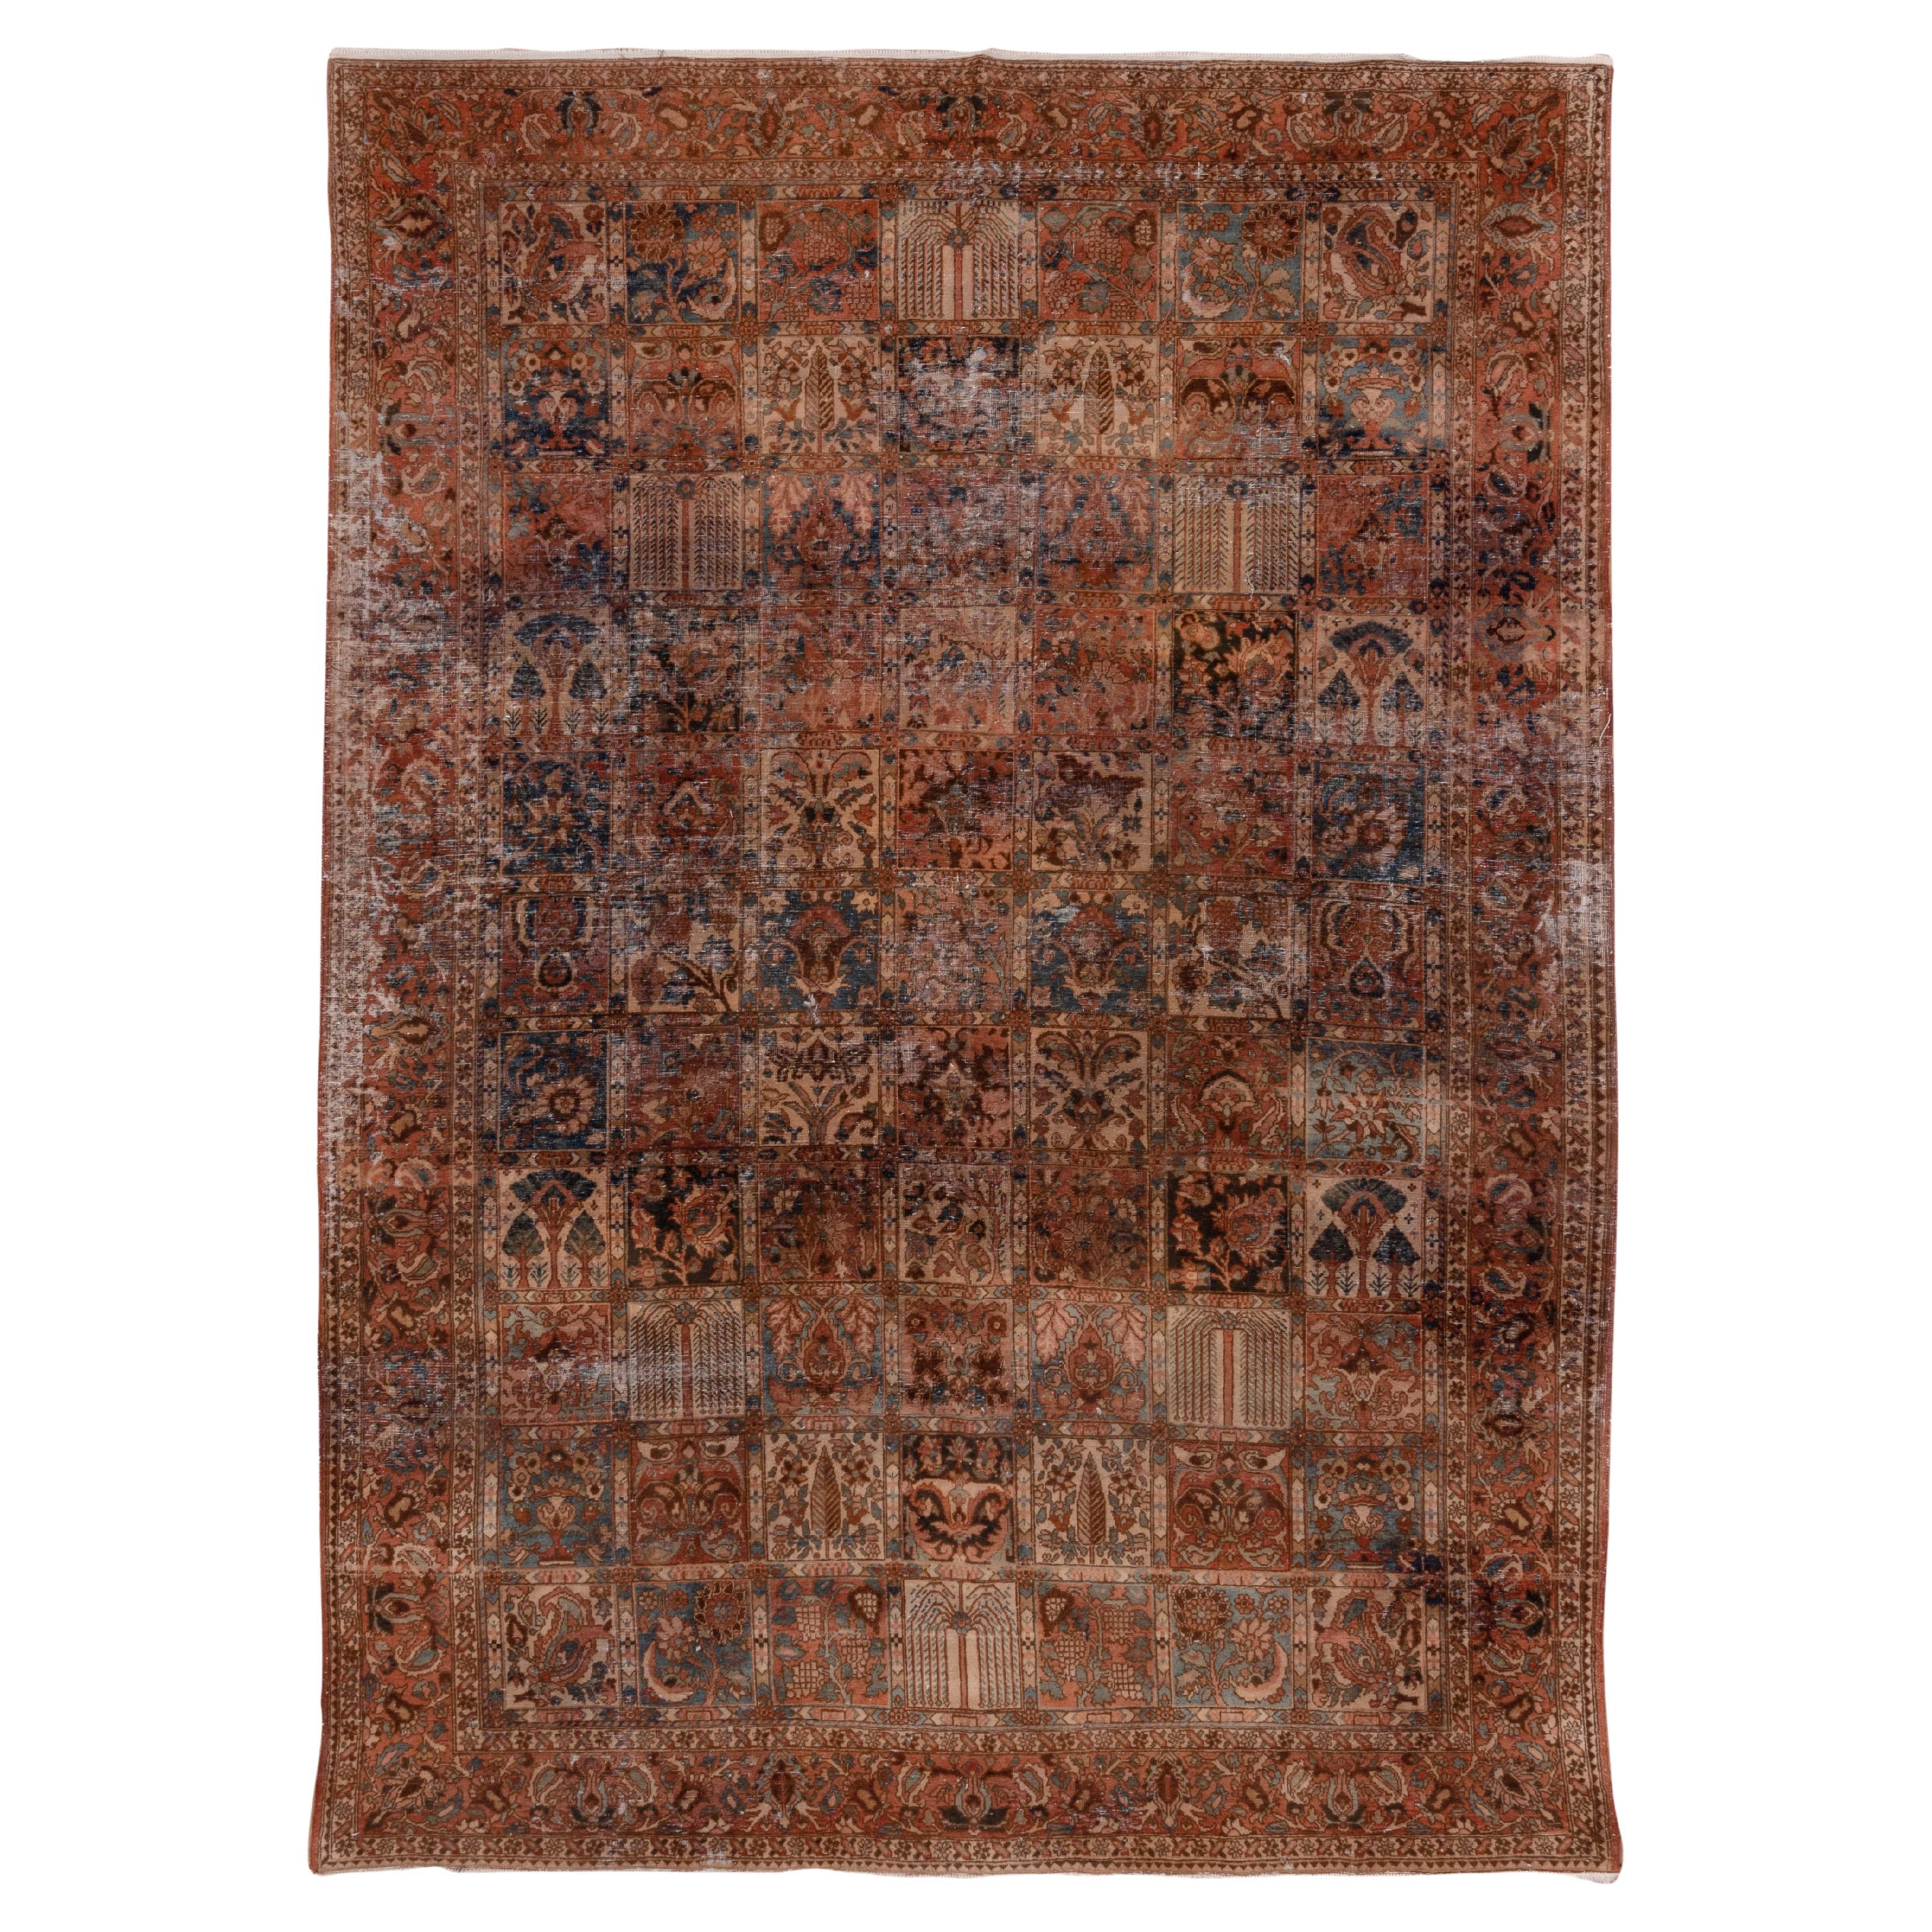 Eliko Rugs by David Ariel Antique Persian Bakhtiari Rug with Warm TOnes (tapis persan ancien aux tons chauds)